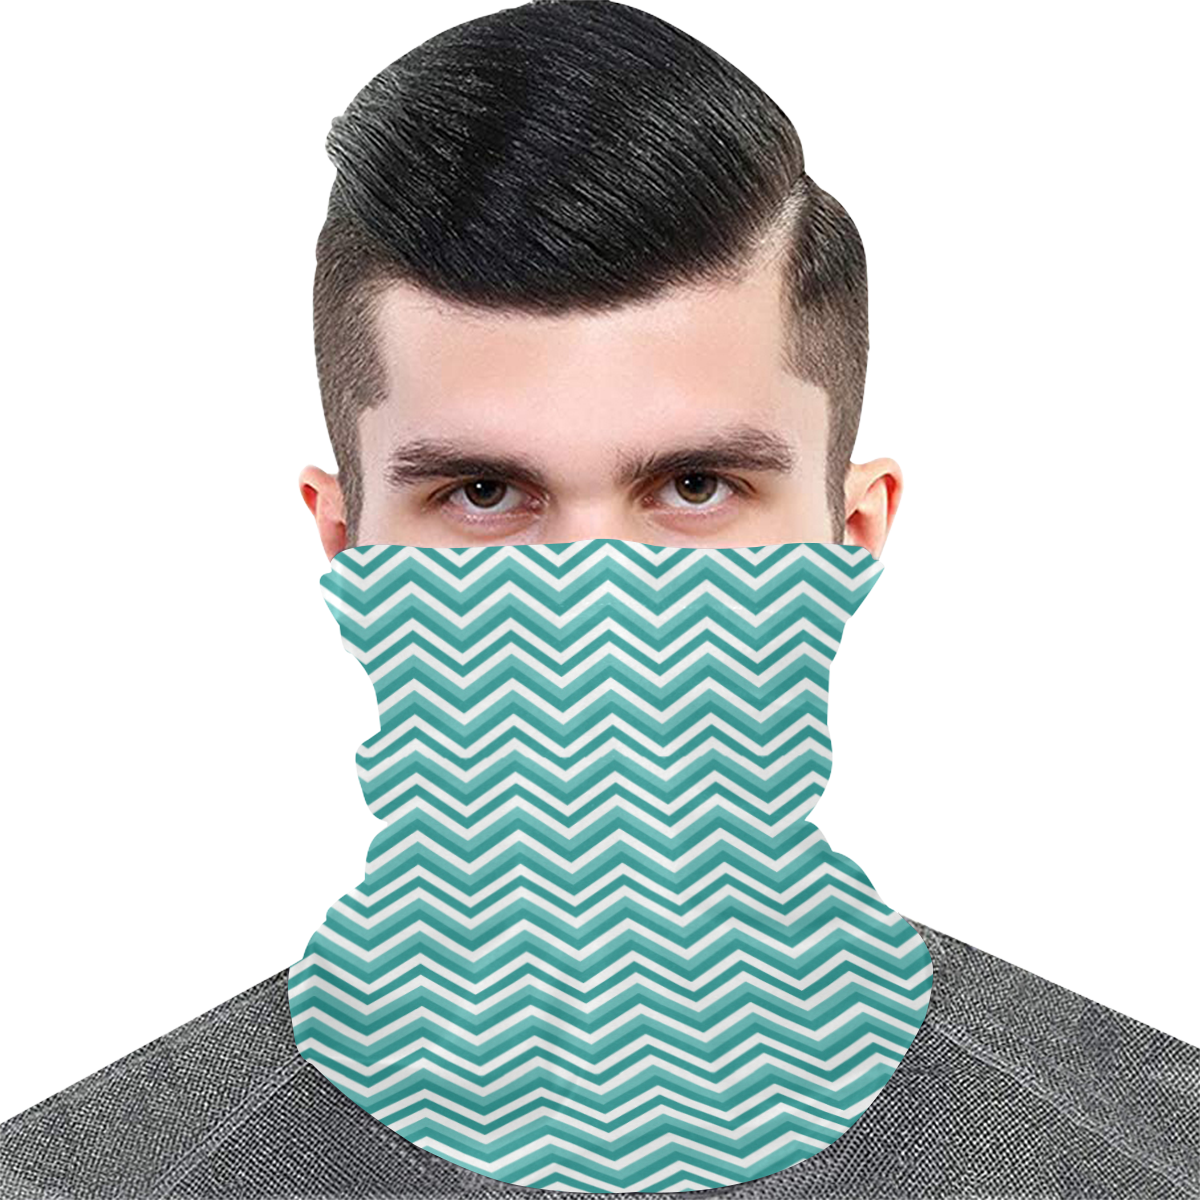 Turquoise Chevron Multifunctional Dust-Proof Headwear (Pack of 5)